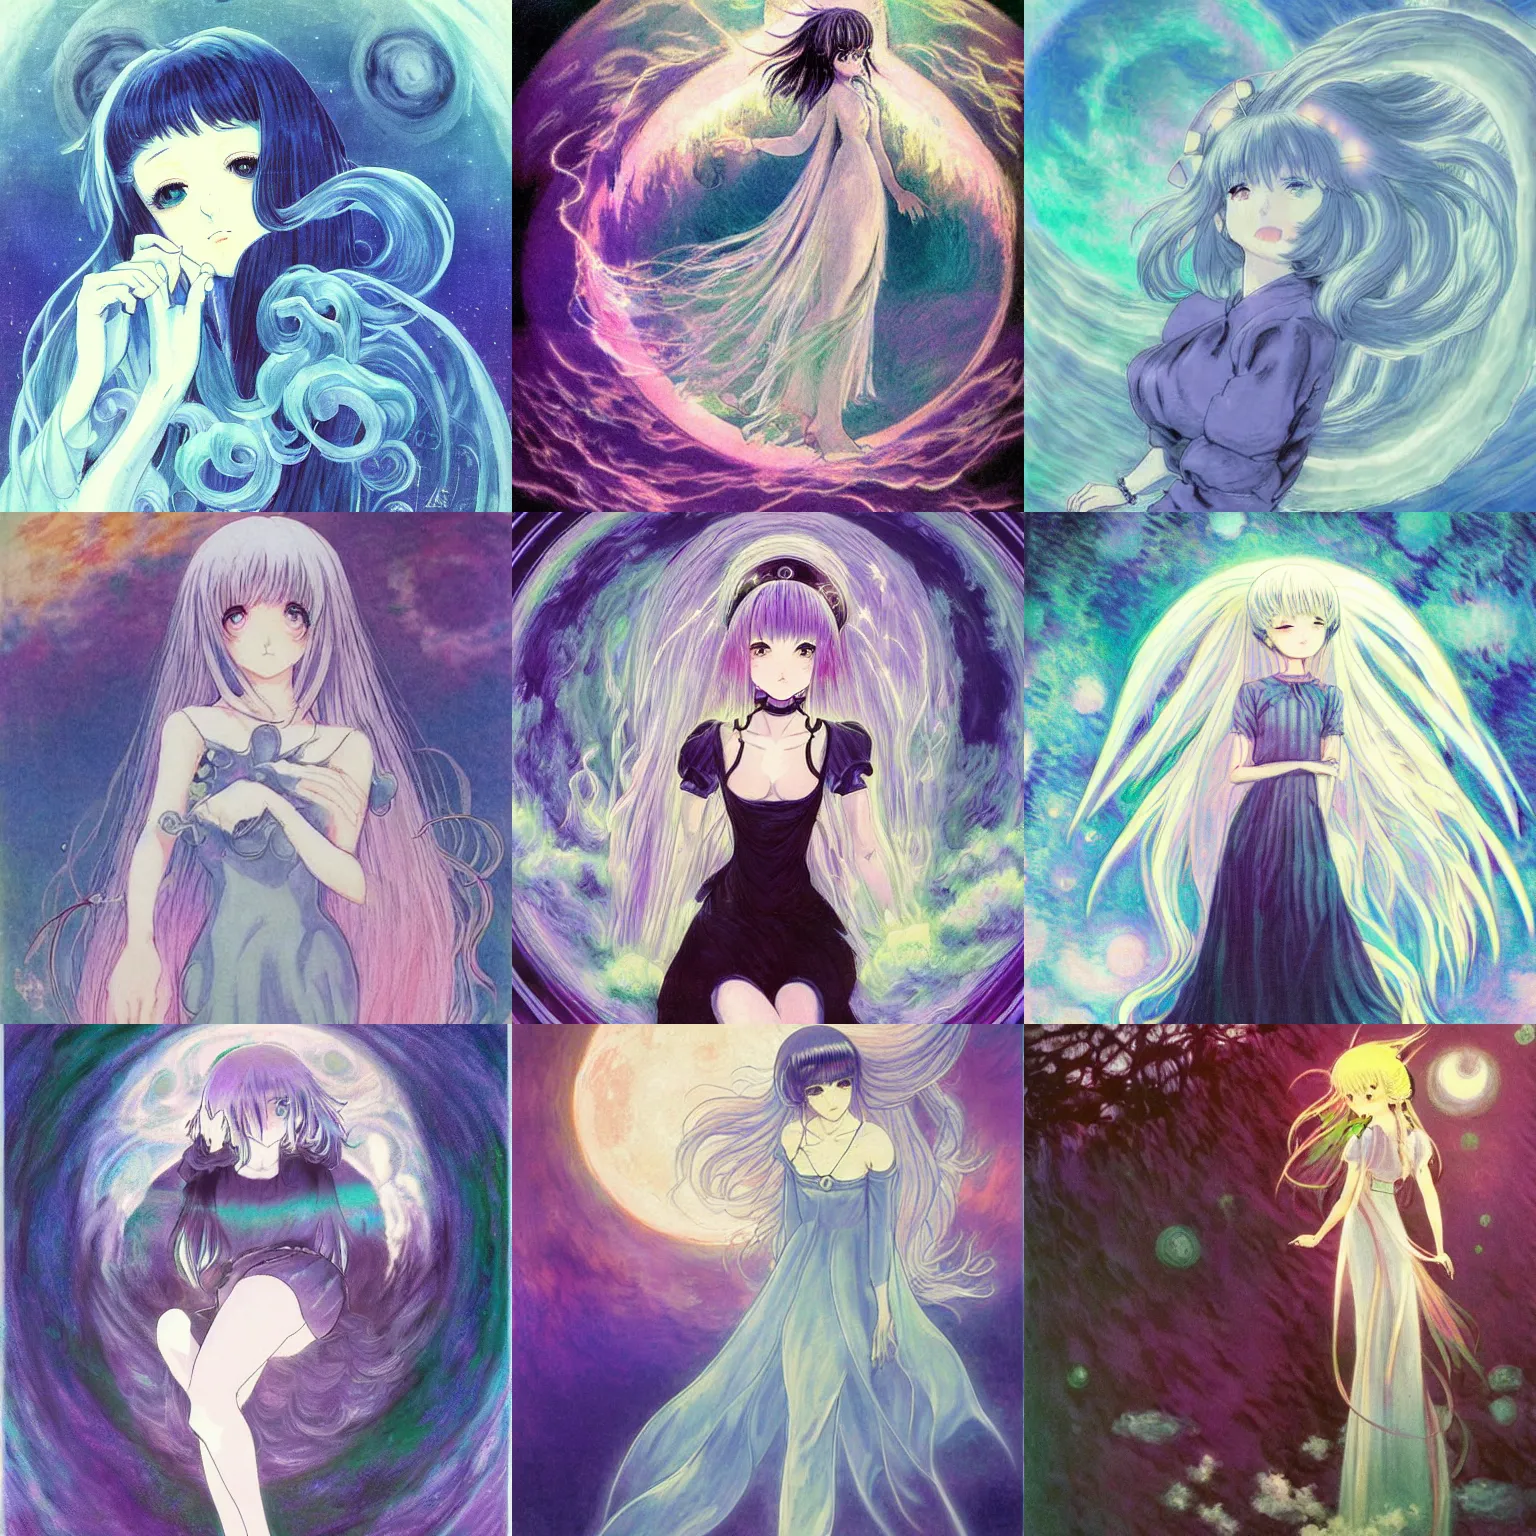 Prompt: masumune shirow cute eerie retro anime girl, ethereal angelic being of light, gloomy face, crystalline translucent hair, sky with swirling clouds, shining crescent moon, spiral heavens, pale pastel colours, beautiful painting by claude monet